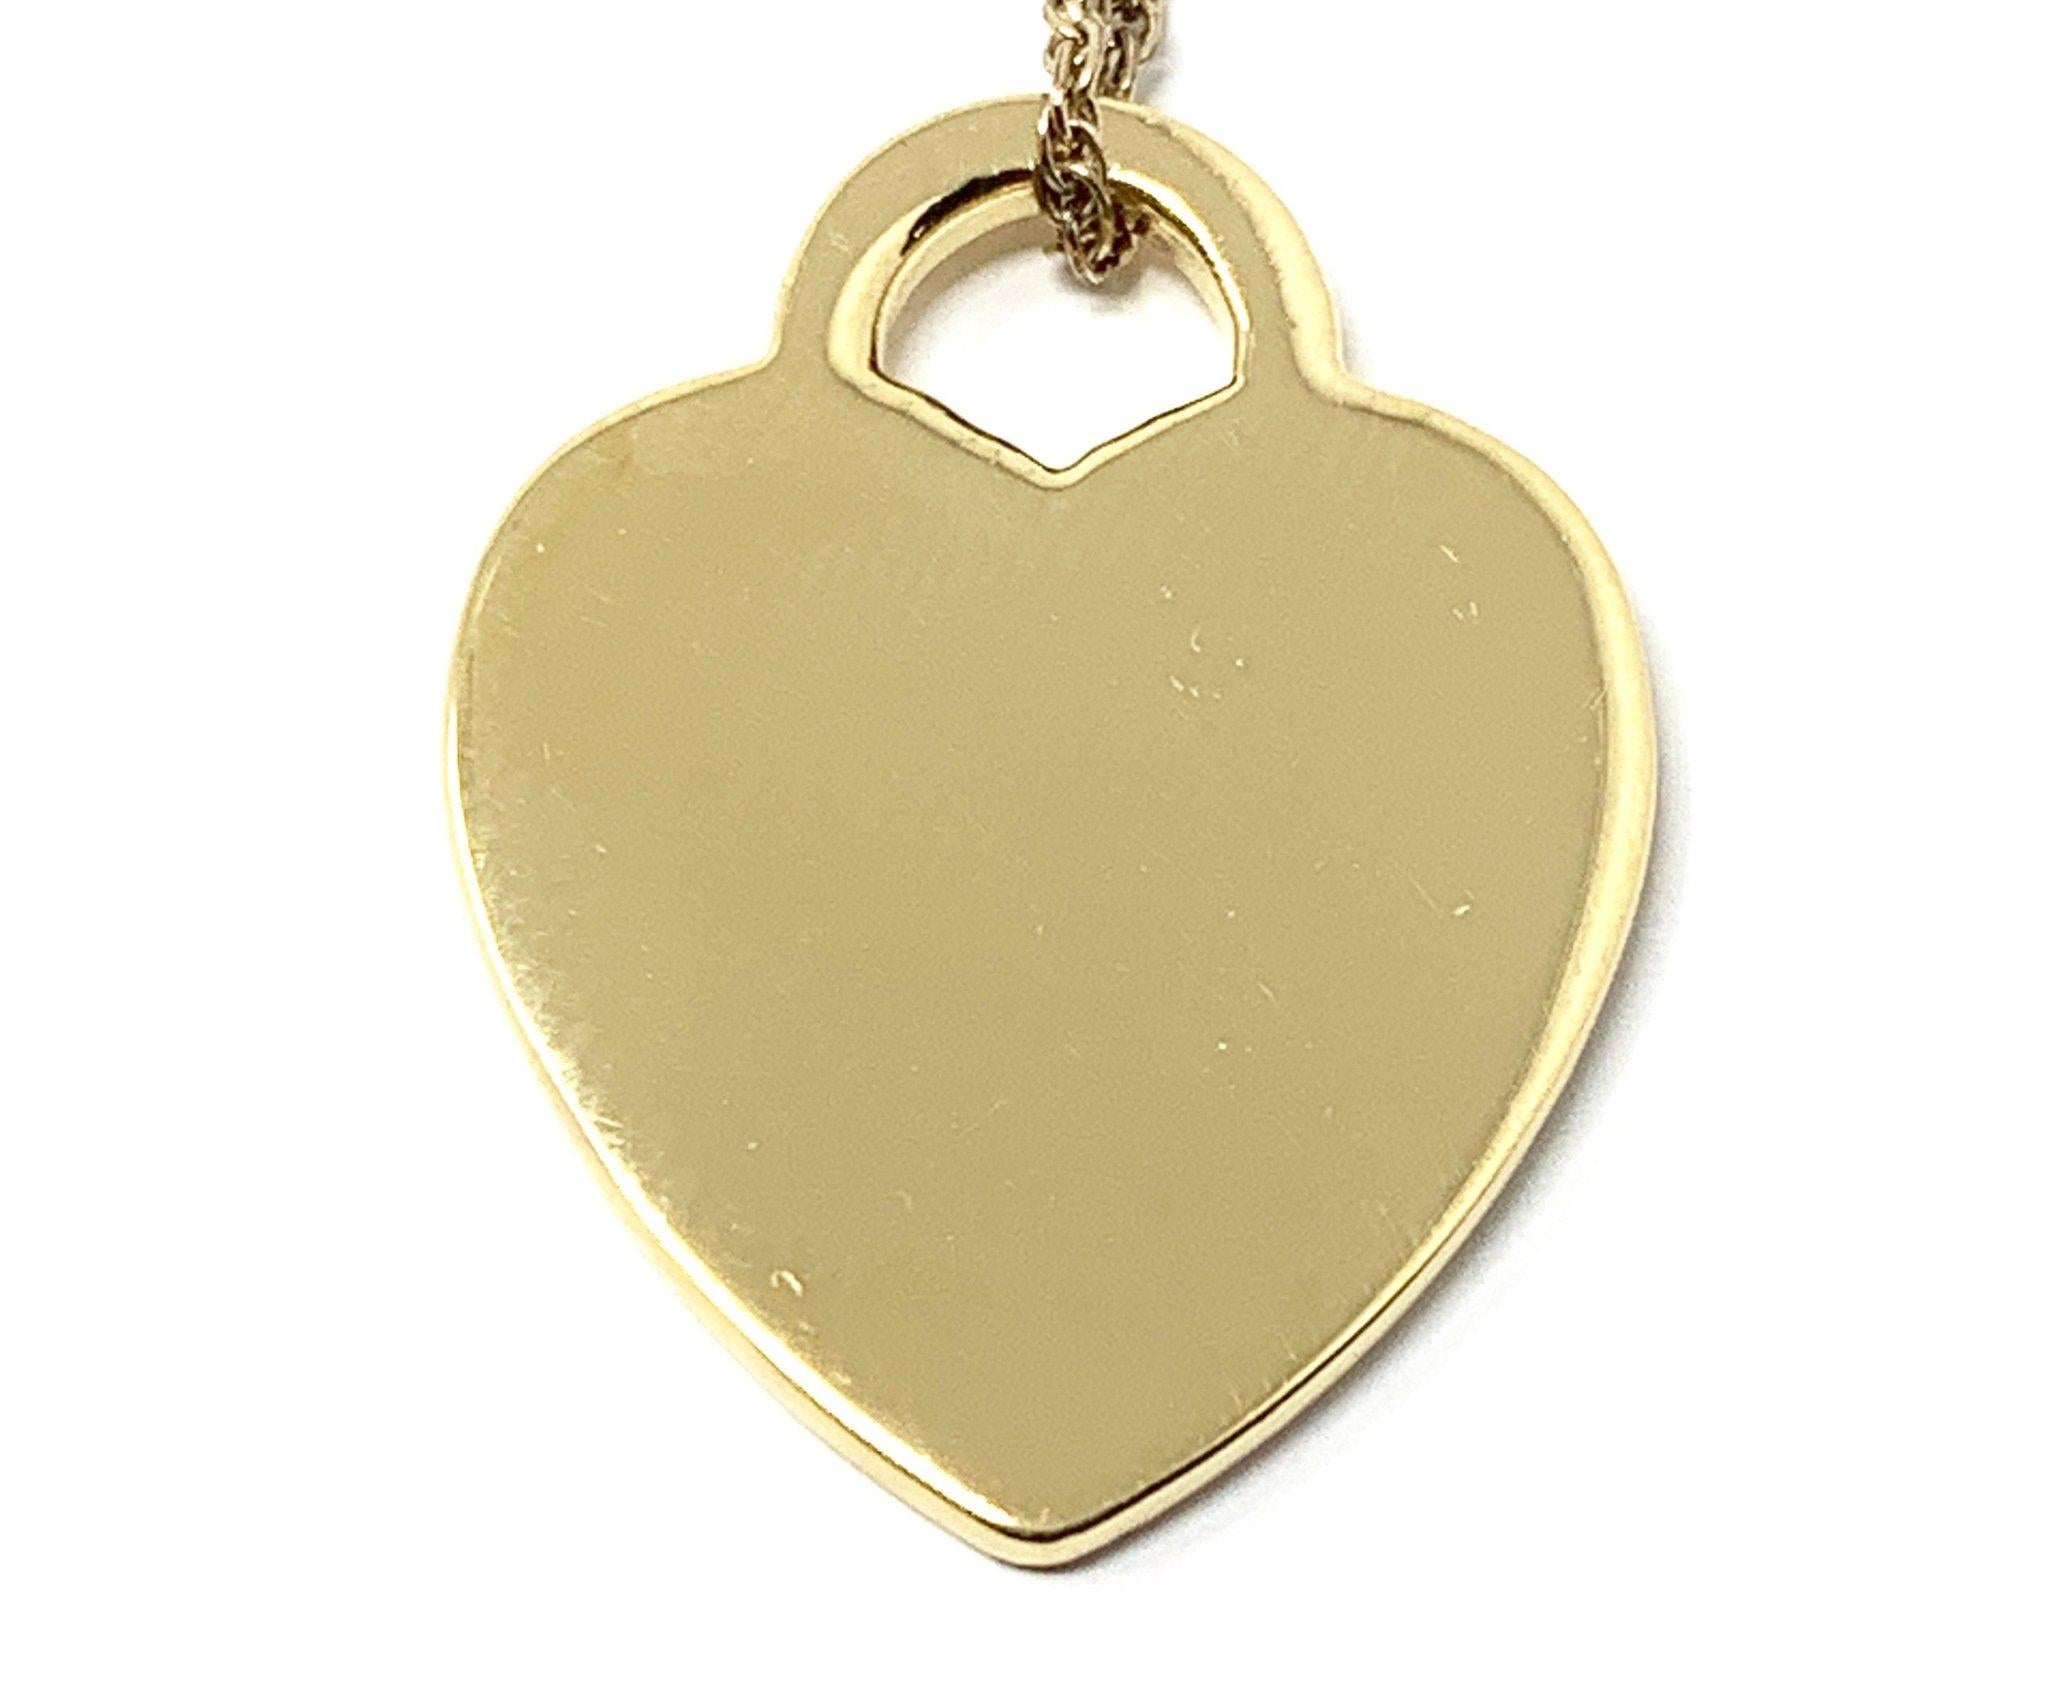 (Item Description) 
Brand - Tiffany&Co.
Gender - Unisex
Condition - Pre-Owned 
Style - Heart Pendant 
Metals - 925 Silver 
Coating - 24k Yellow Gold
Weight - 4.0 Grams
Hall marks - Please Return to /Tiffany&co NY
length -1 Inch Aprox
Tiffany Jewelry